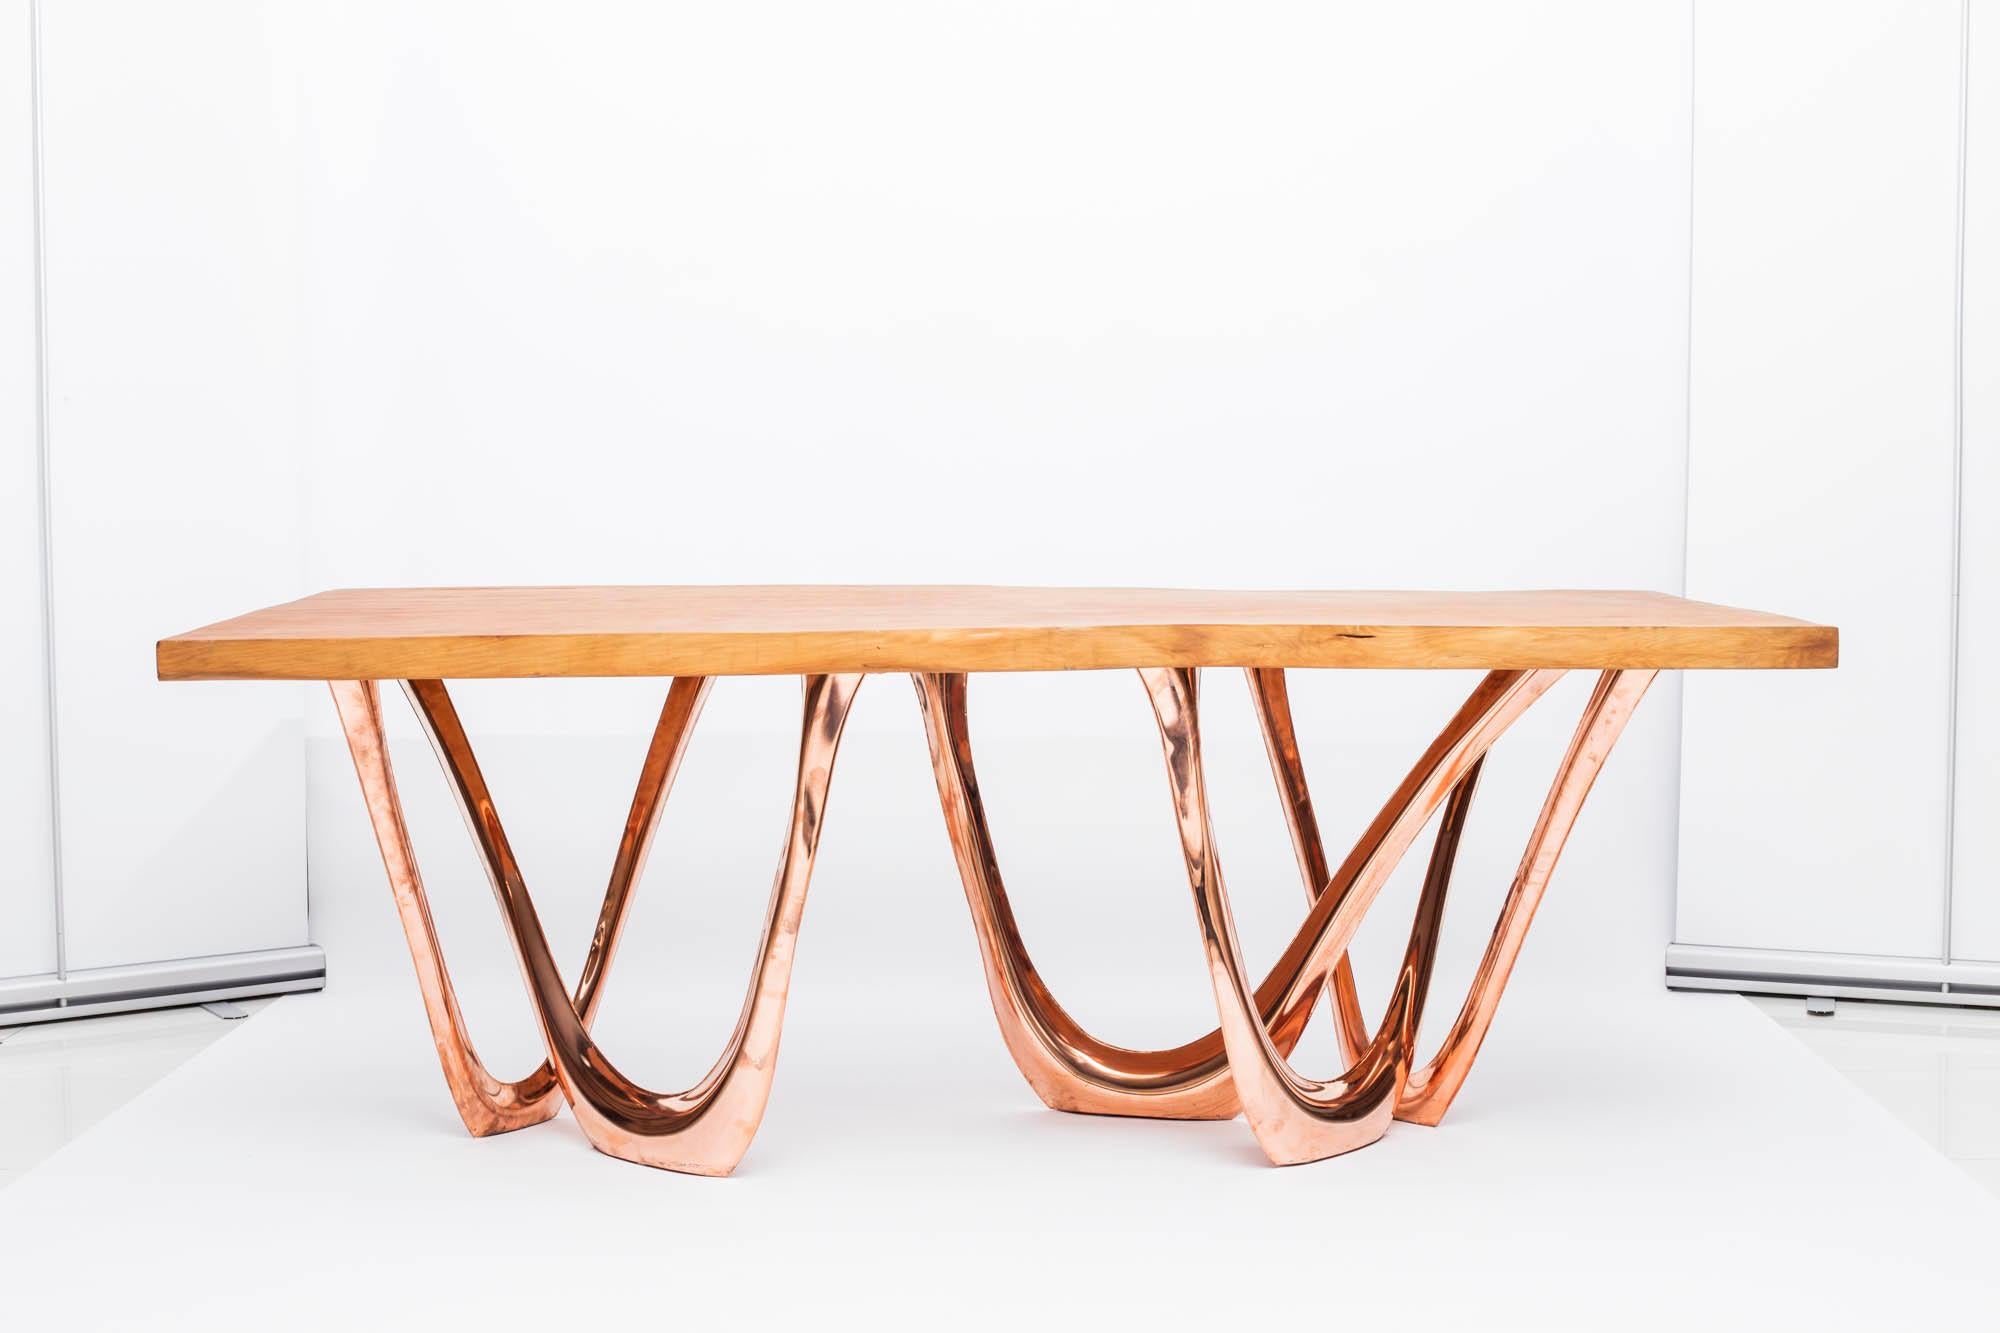 Polish G-Table CU+K in Copper-Cladded Steel with Kauri Wood Top by Zieta For Sale